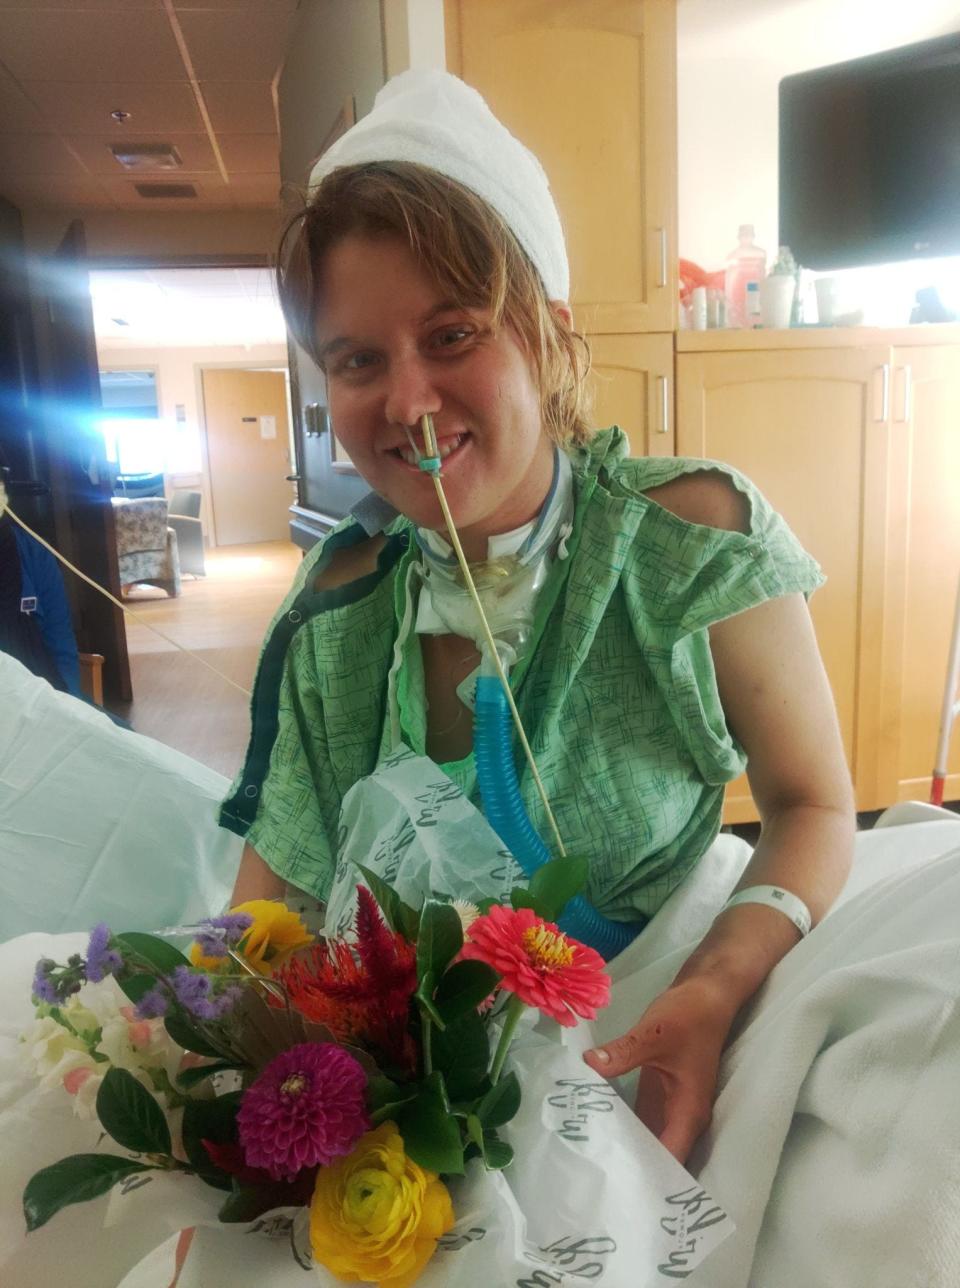 Sierra DesPlanques poses with flowers in her hospital room at Iowa Methodist Medical Center in Des Moines.